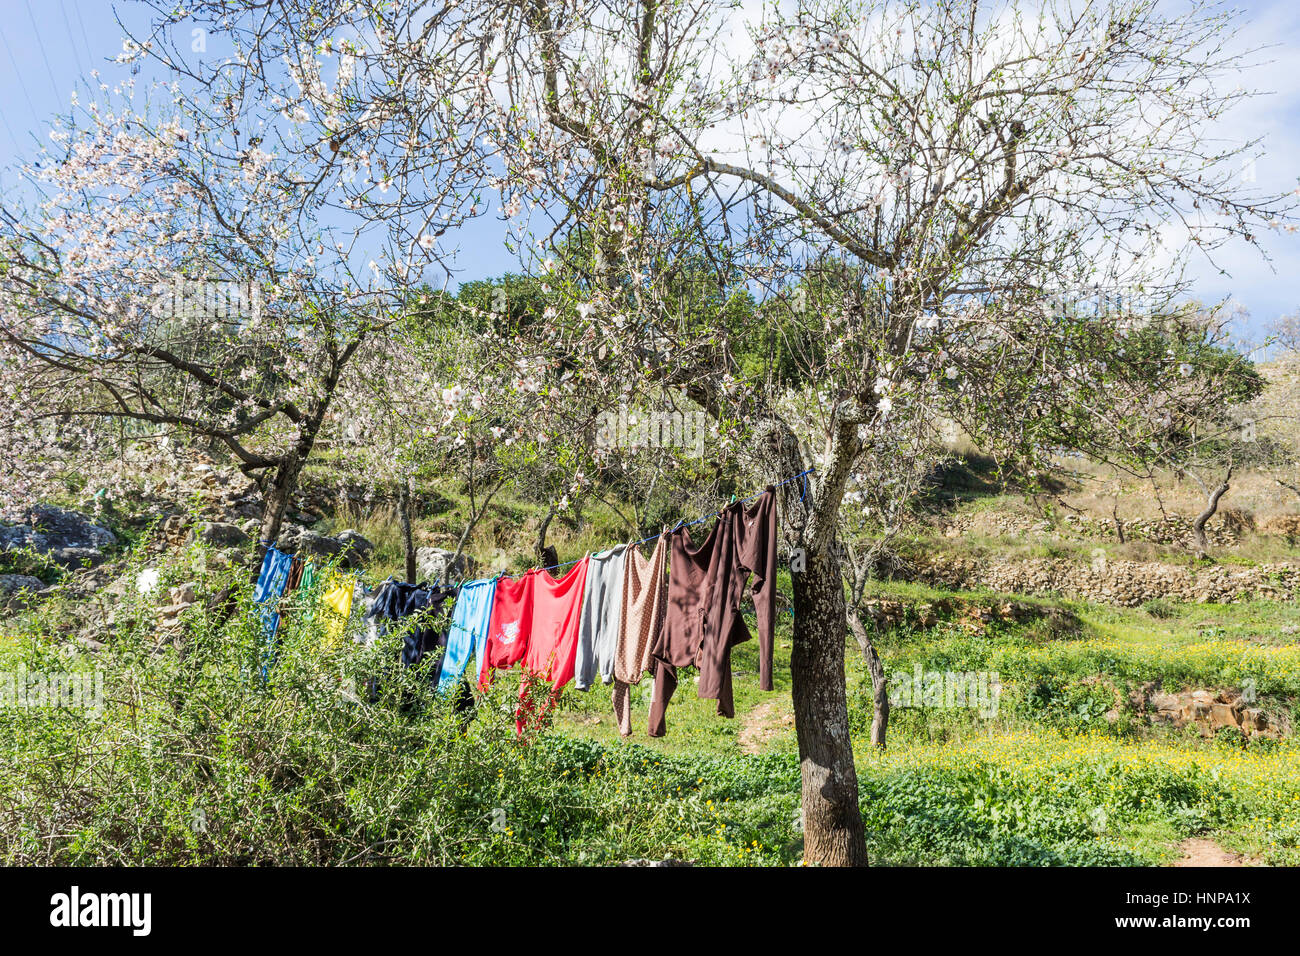 A line of washing drying in the sun amongst almond trees. Andalusian countryside, Spain. Stock Photo